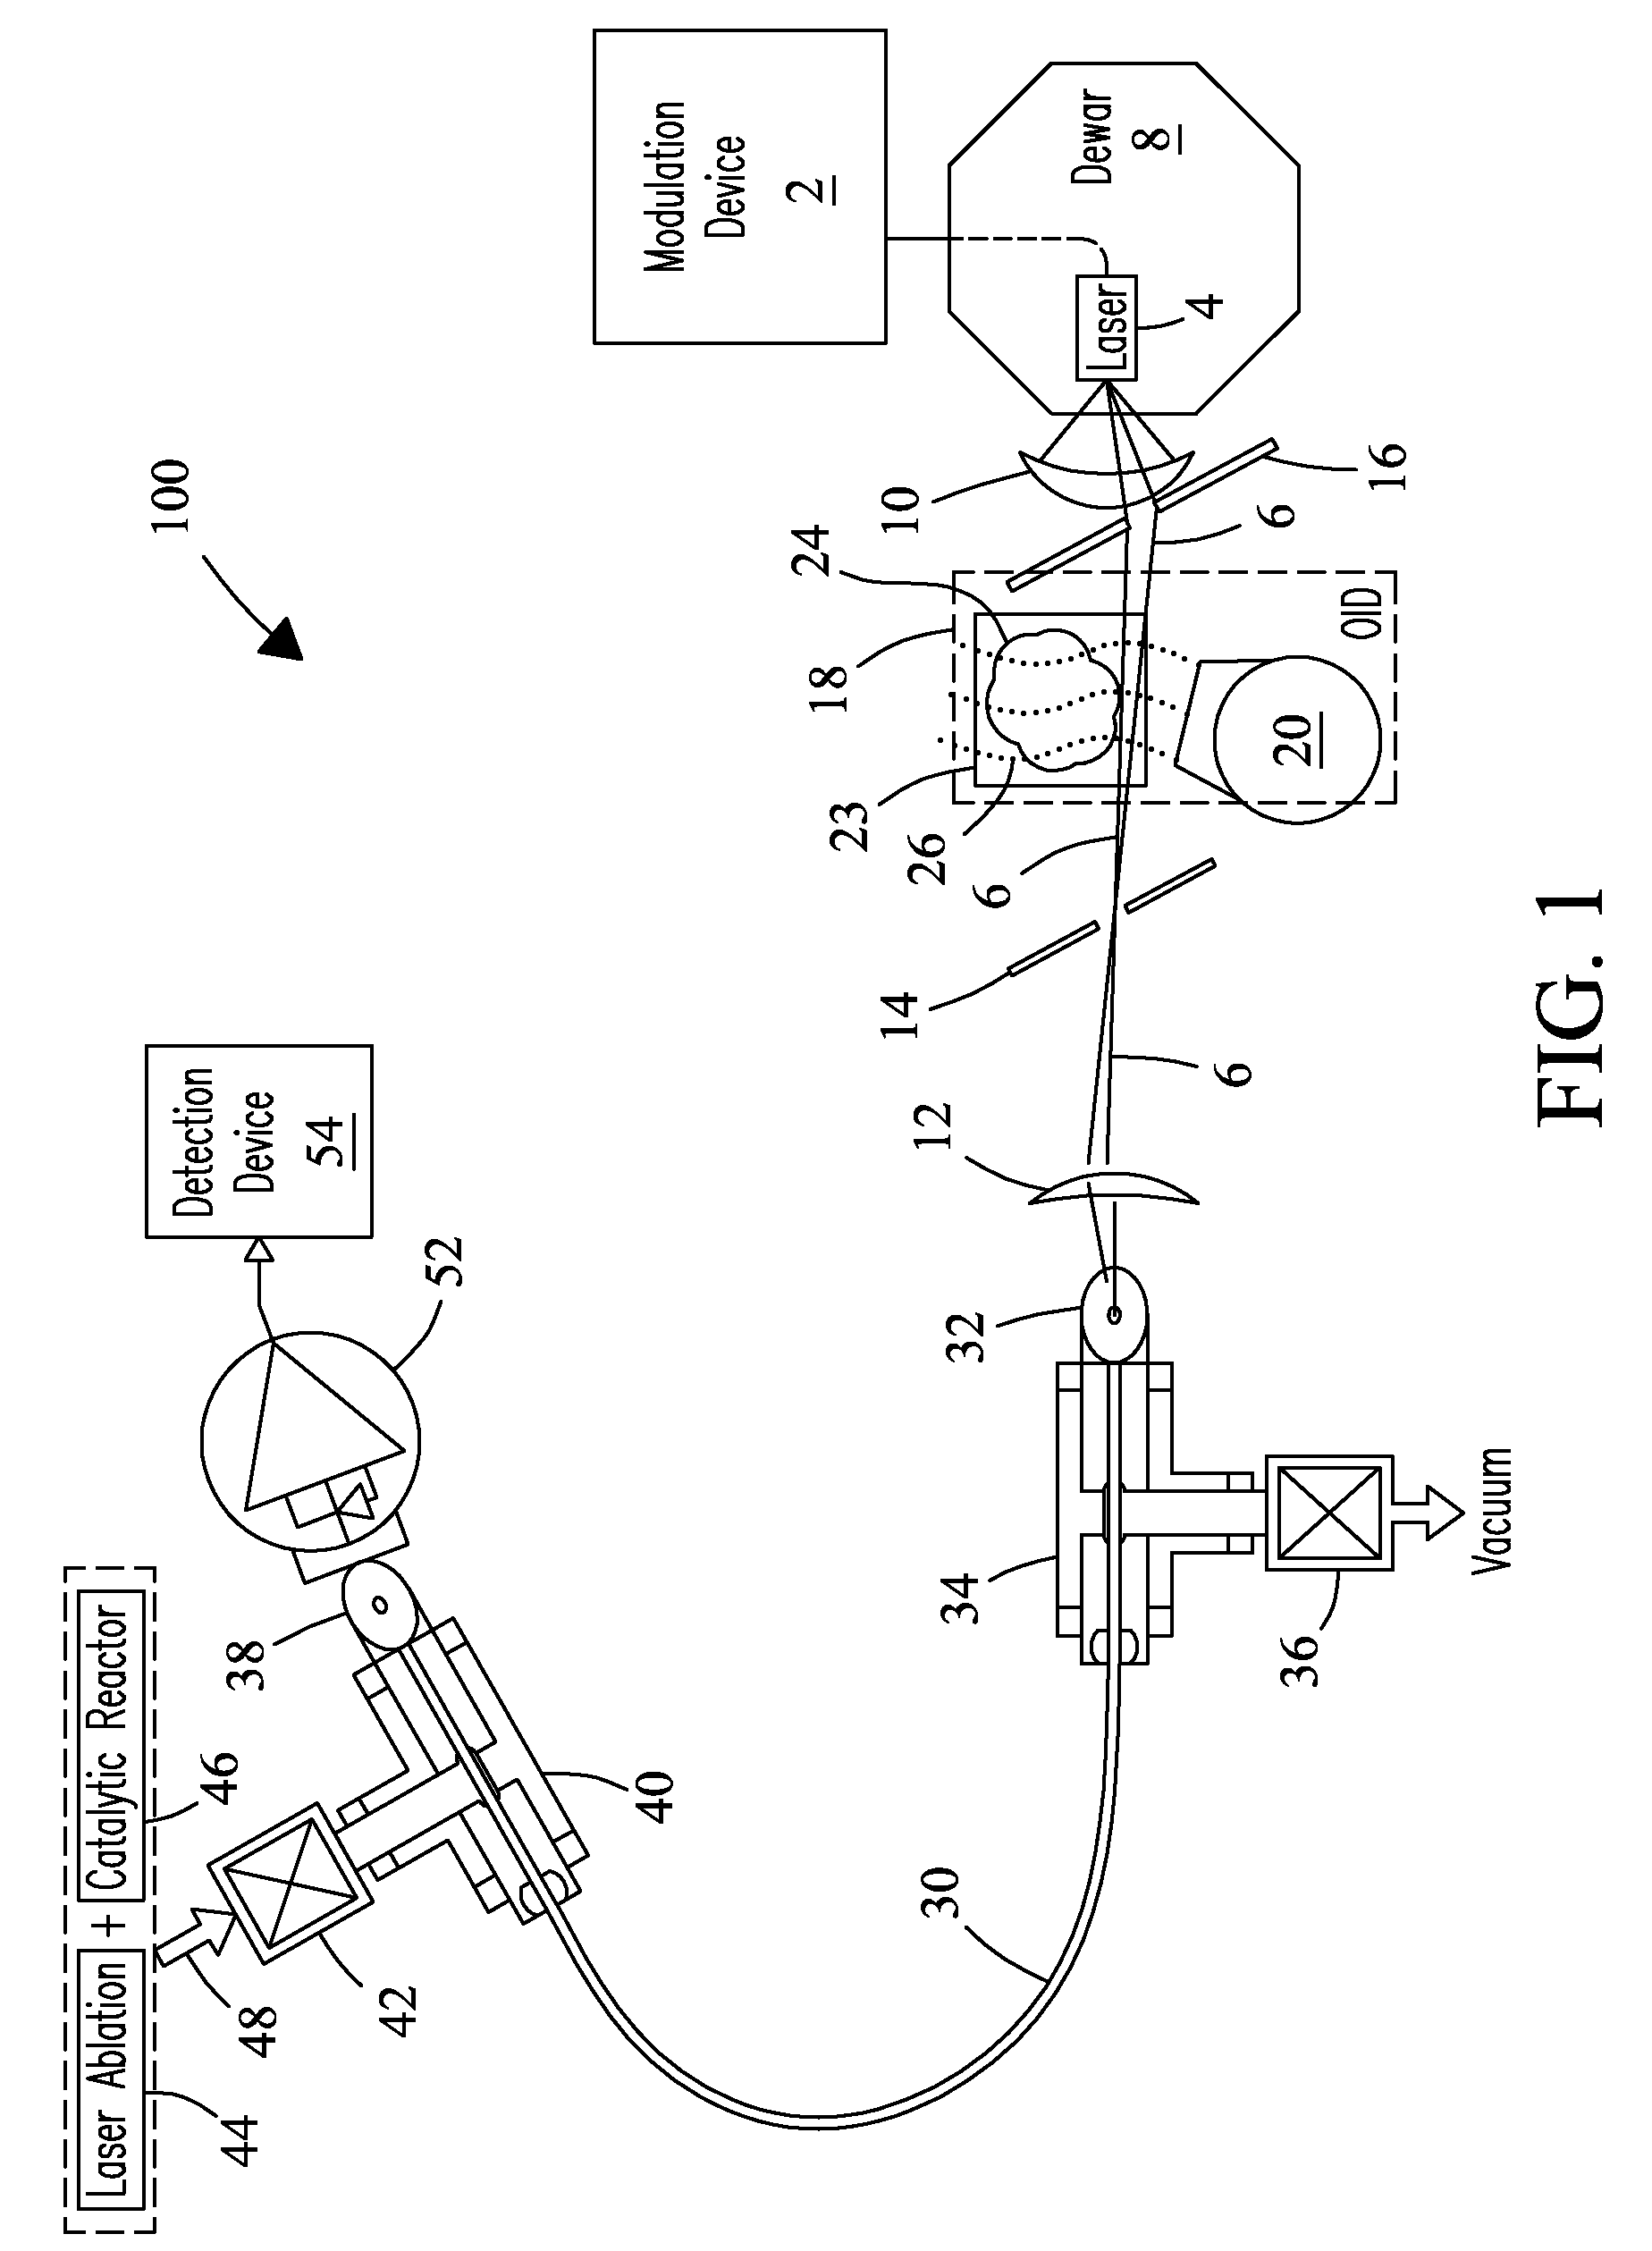 Capillary absorption spectrometer and process for isotopic analysis of small samples